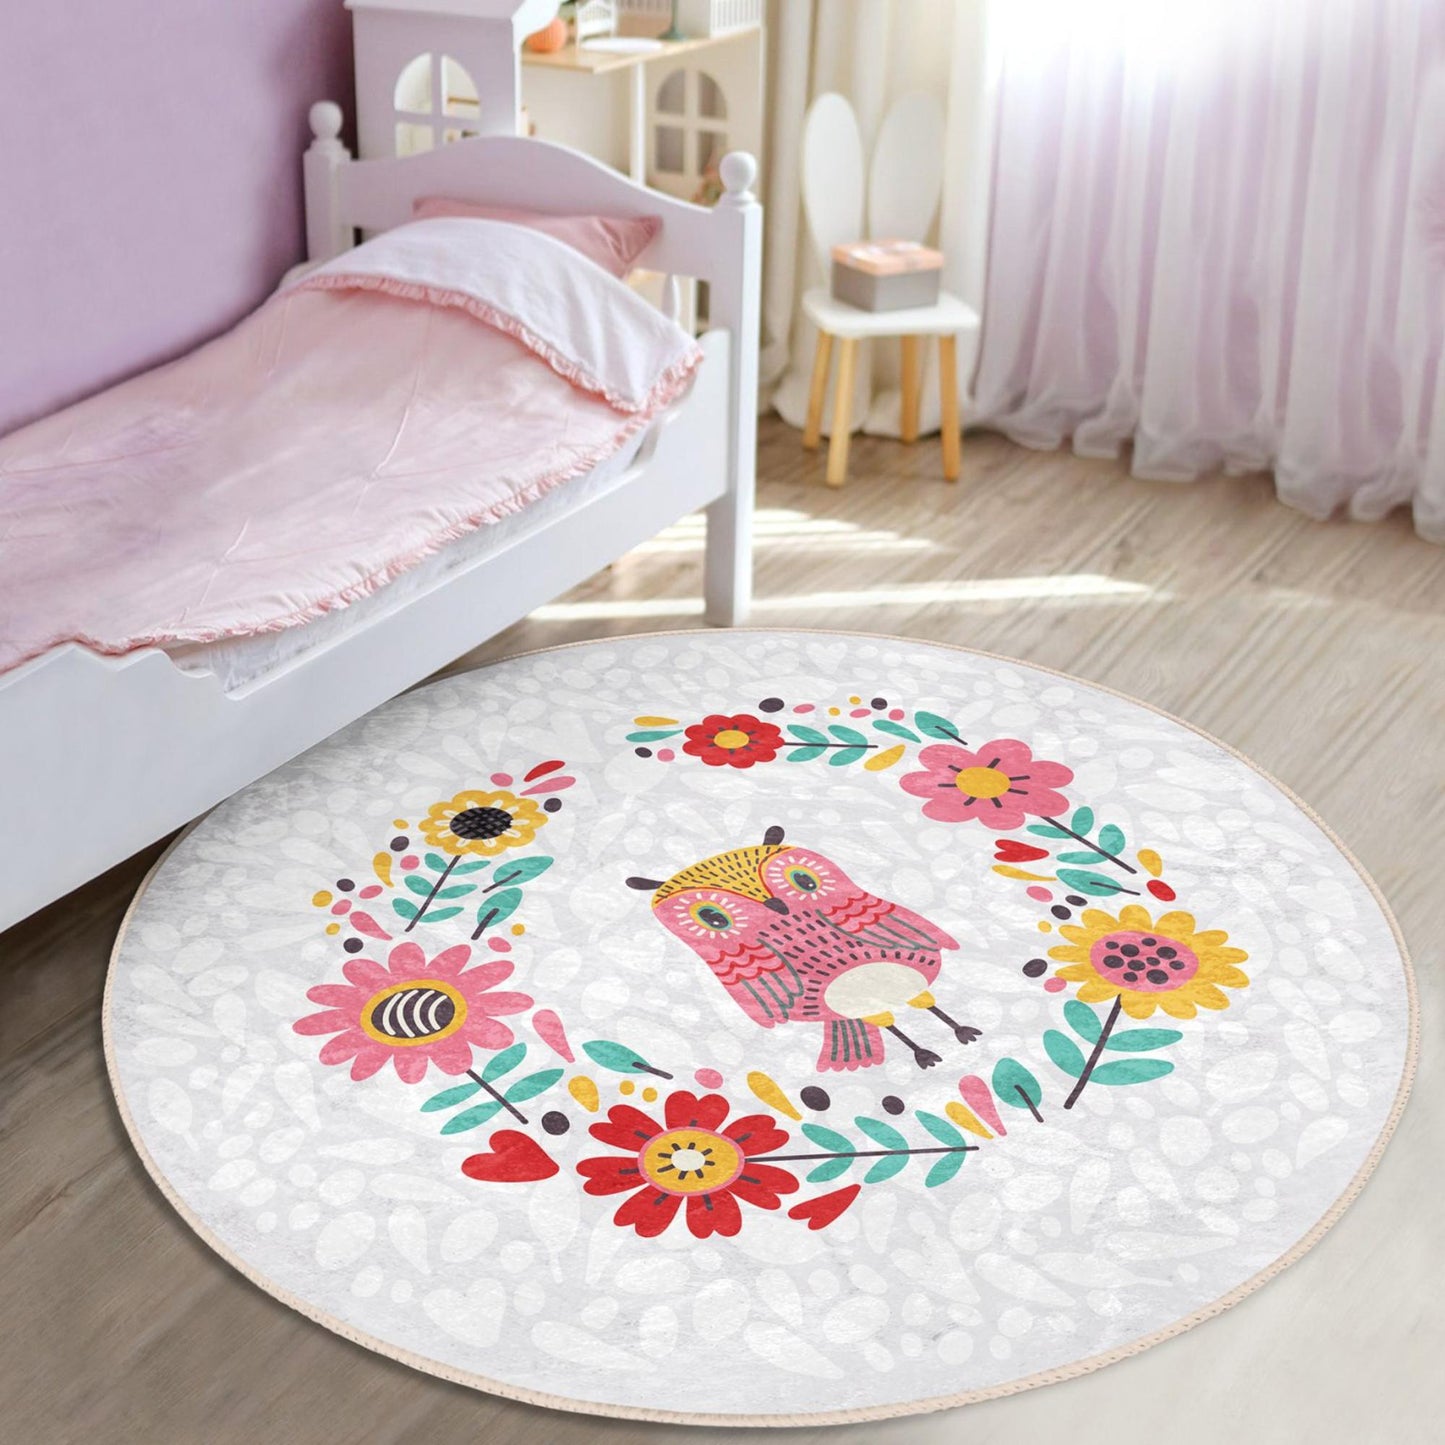 Kids rug featuring floral decor for a charming touch.